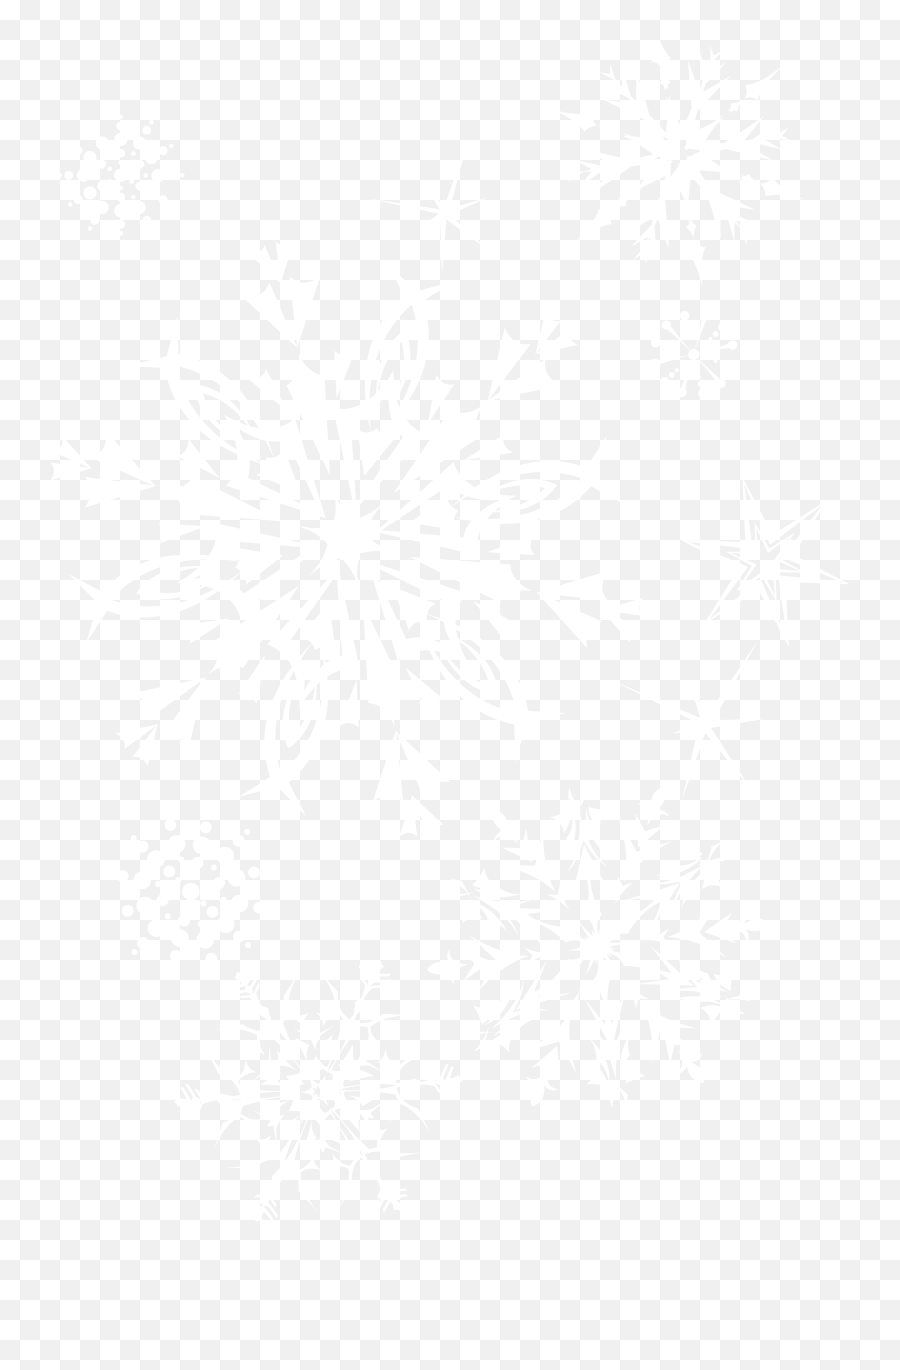 Library Of Snowflake Graphic Transparent Black And White Emoji,Snowflake Clipart Black And White